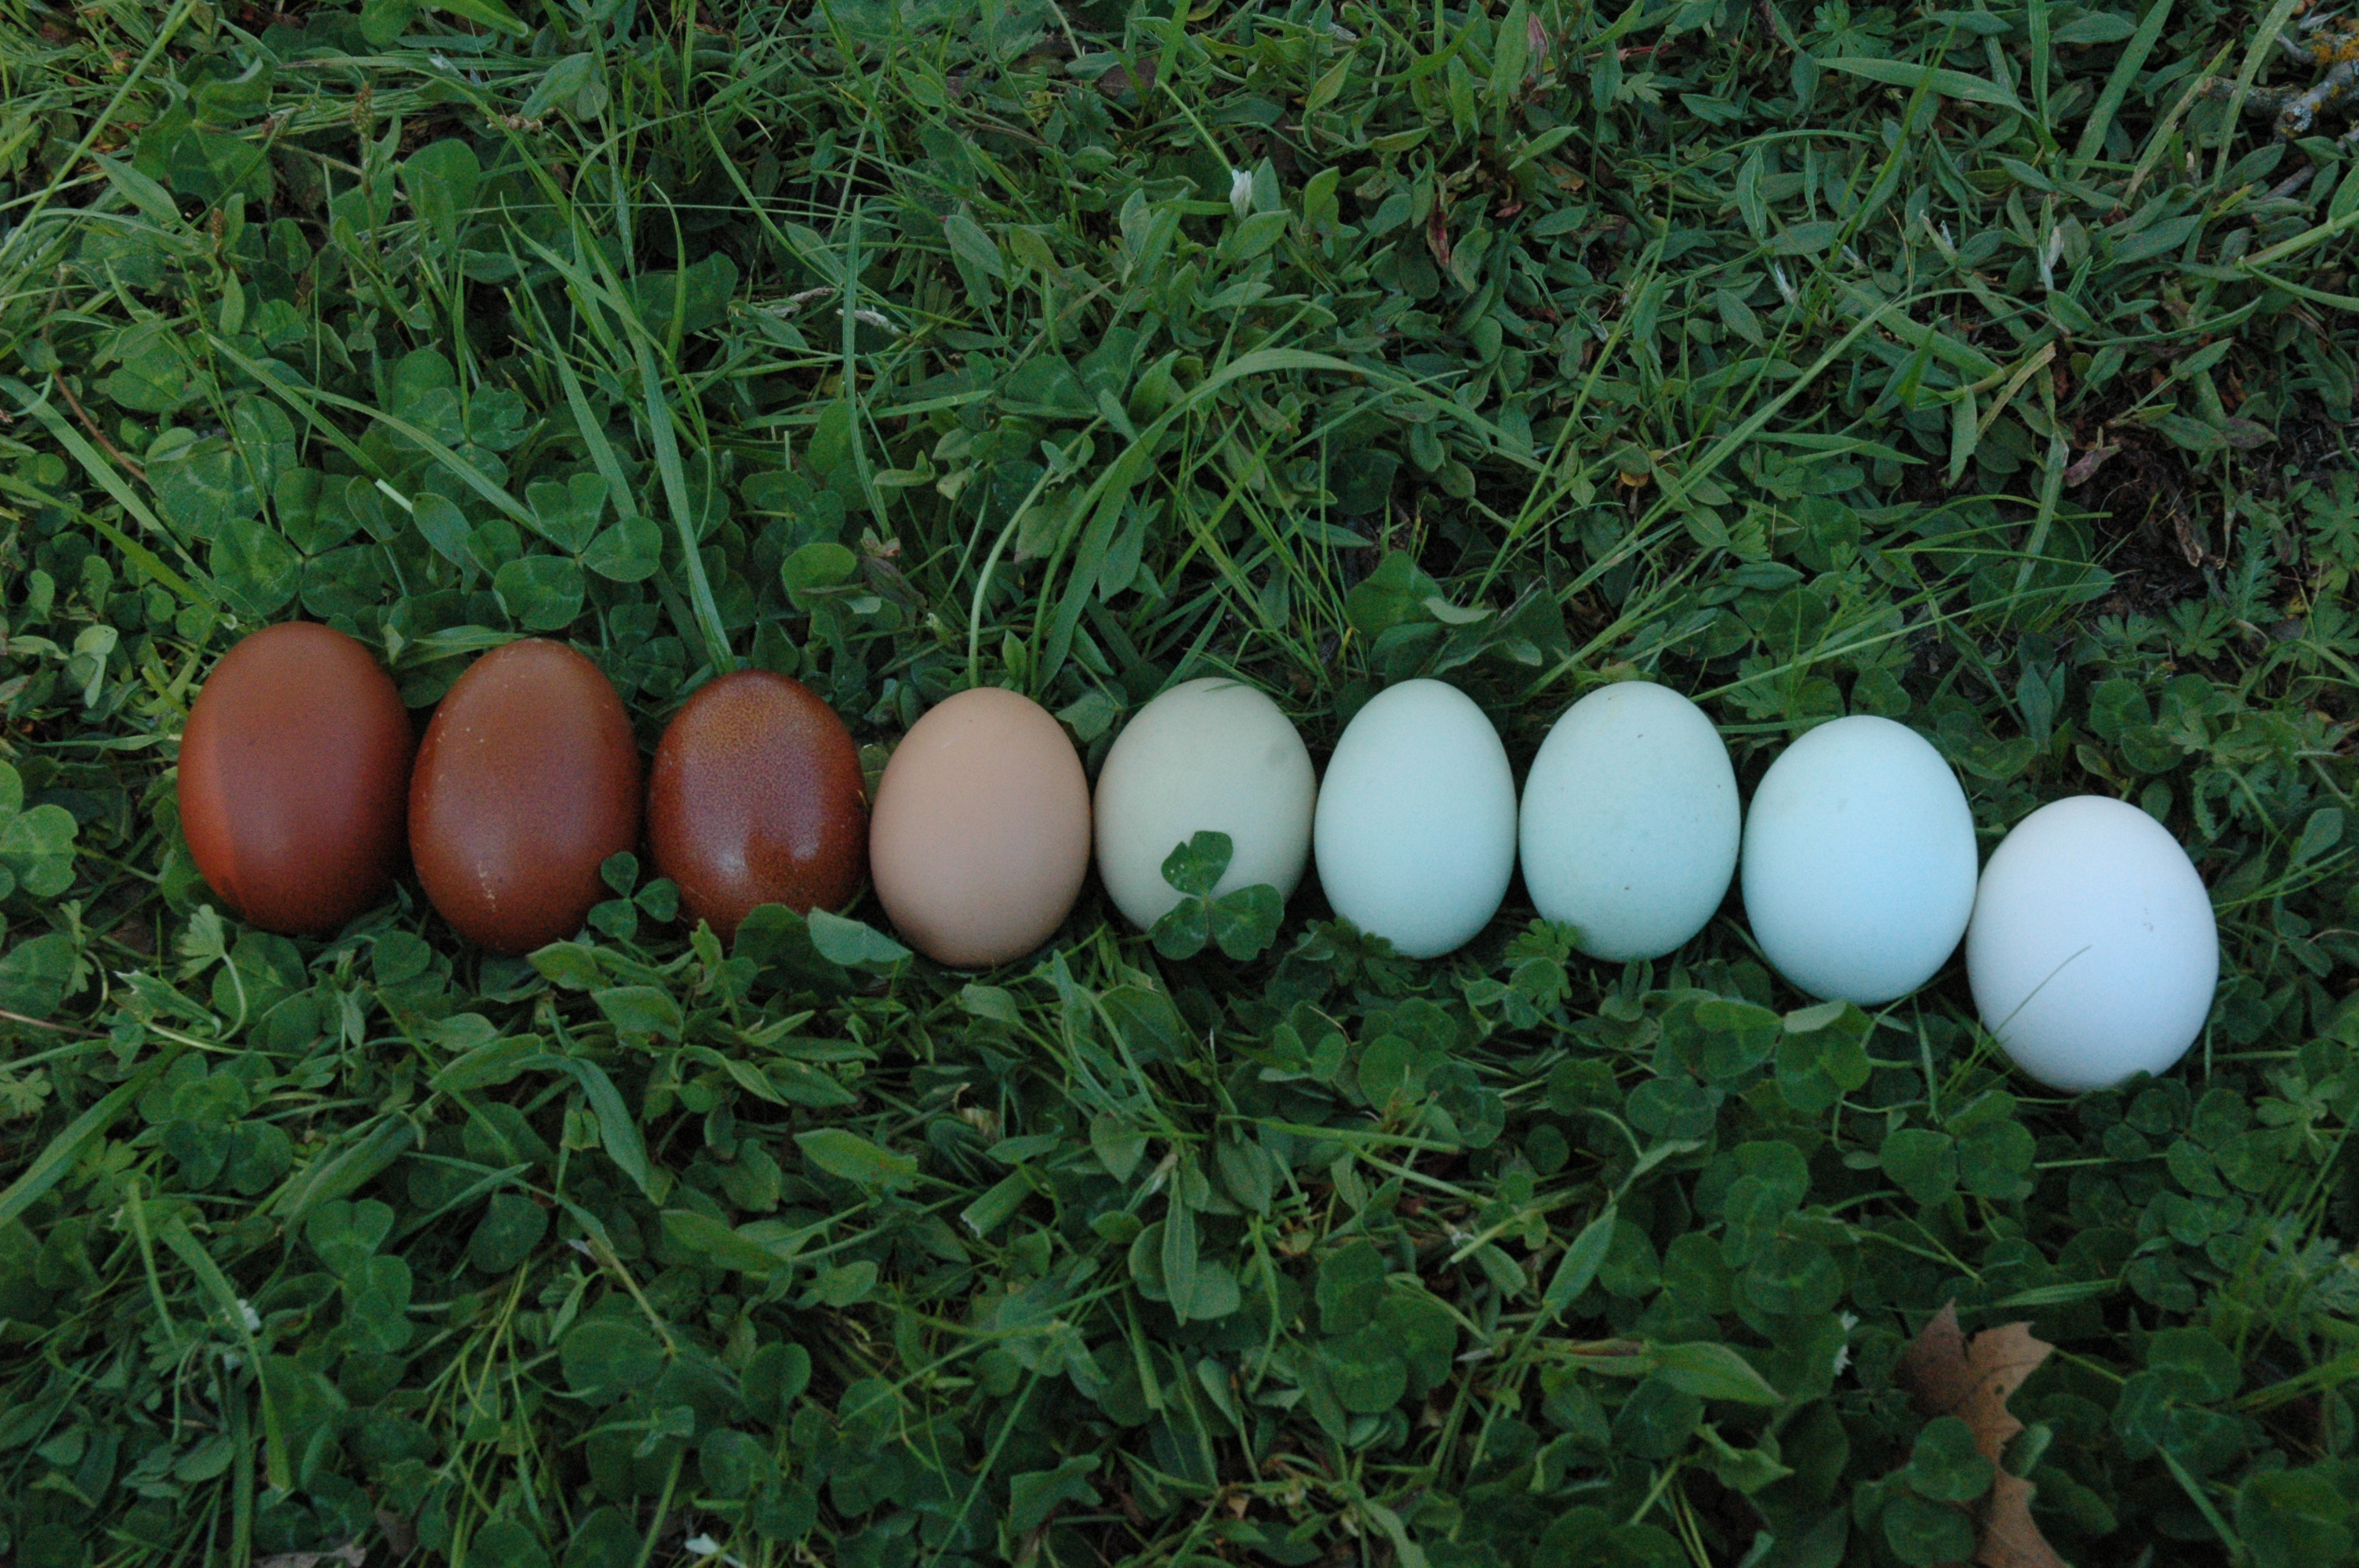 Chicks and Hatching Eggs Available April 2015